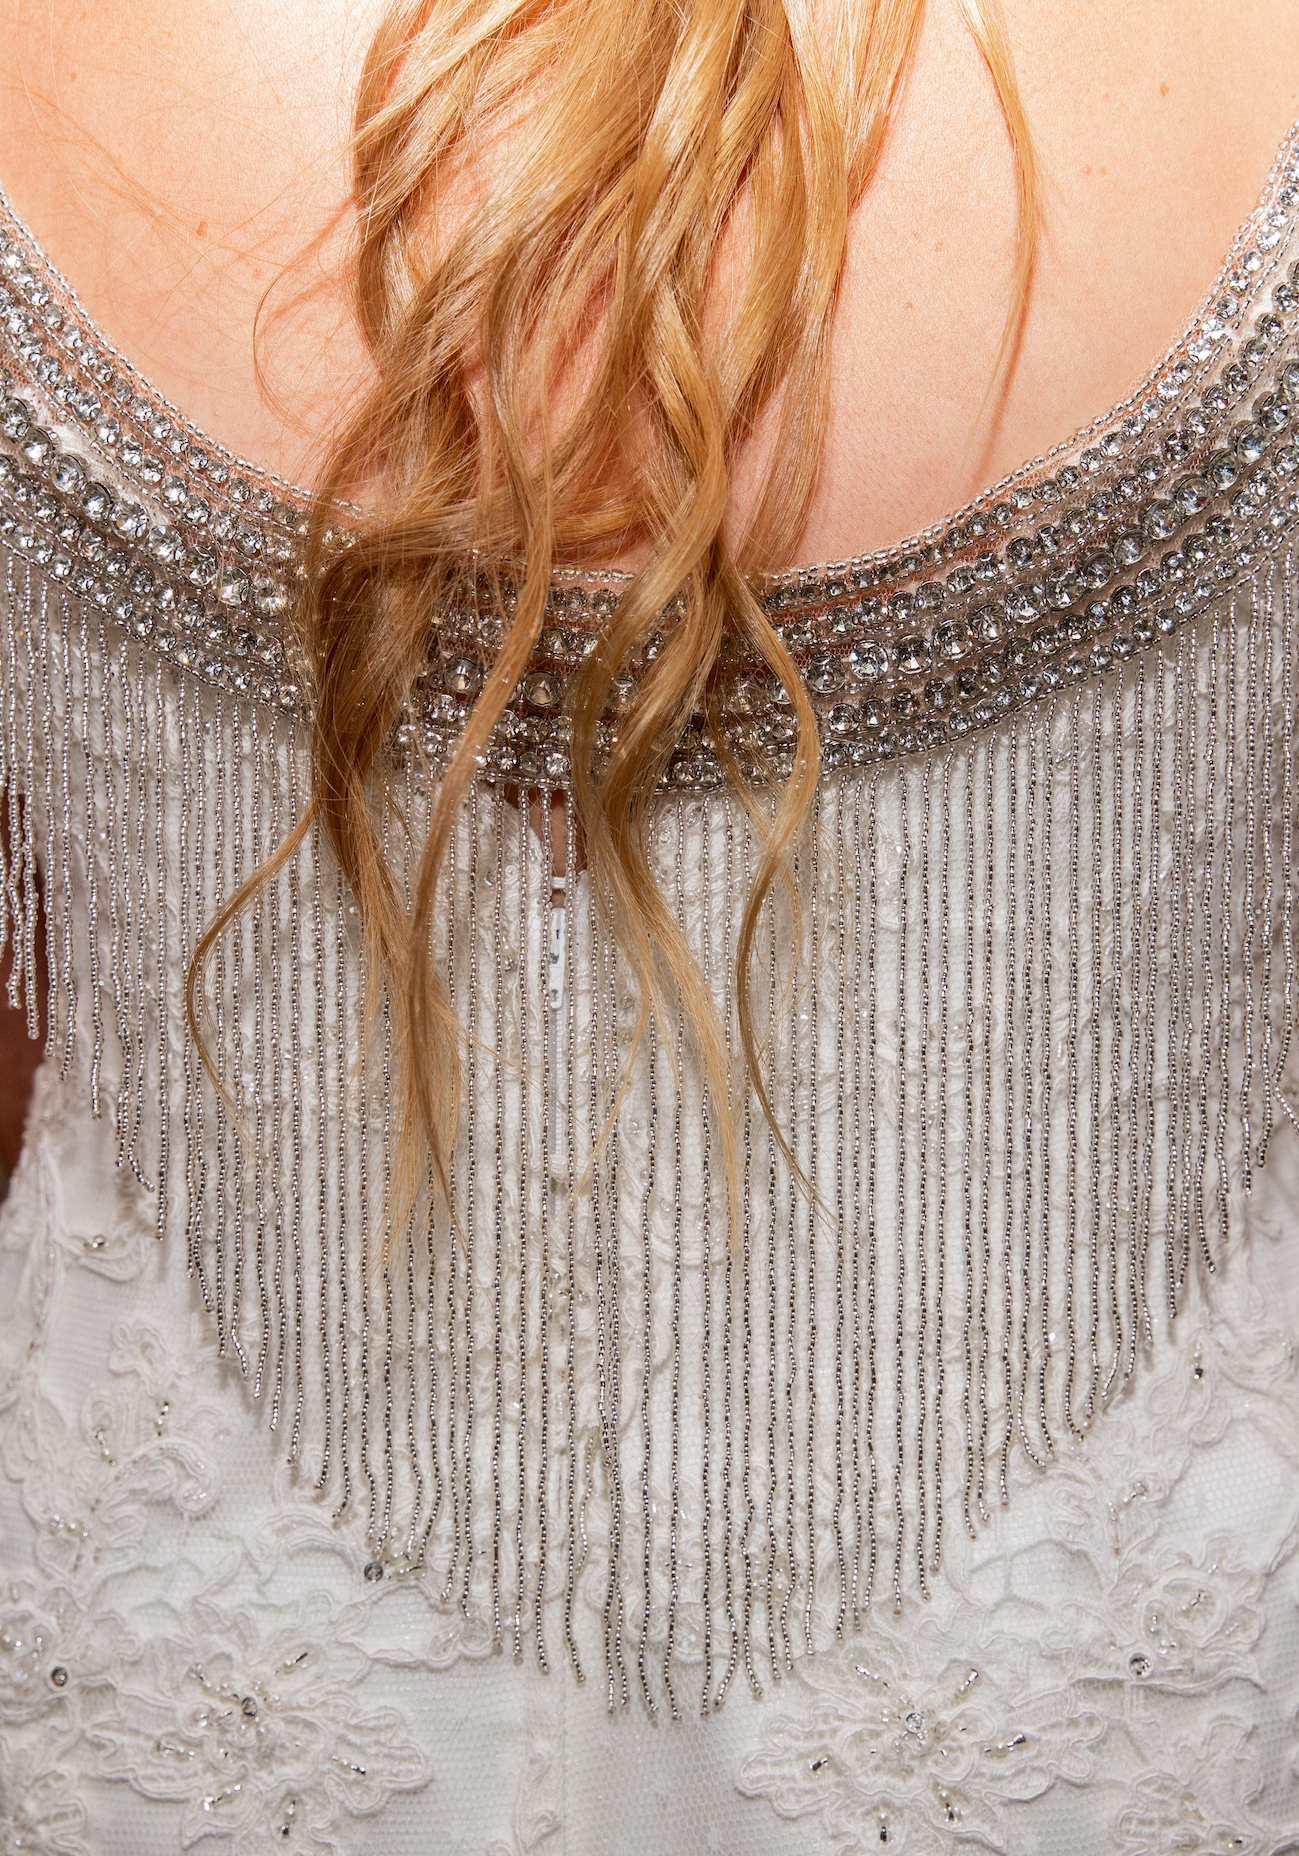 BRIDE WEARING A SPARKLY GOWN WITH A RHINESTONE FRINGE CAPLET IN THE BACK